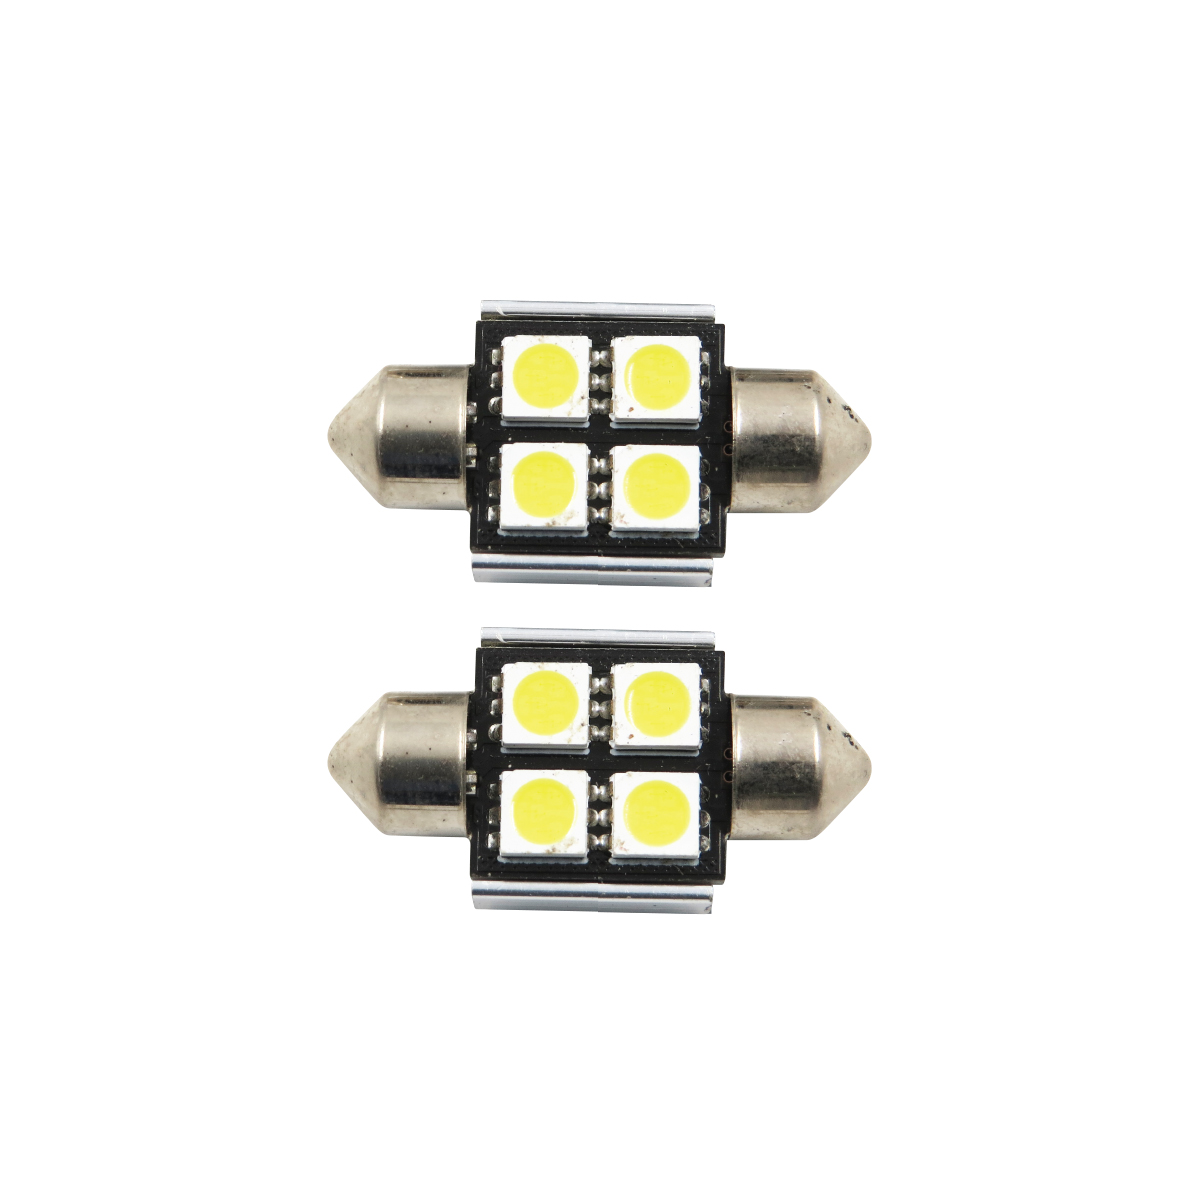 INTERIOR CANBUS 4 SMD 39MM